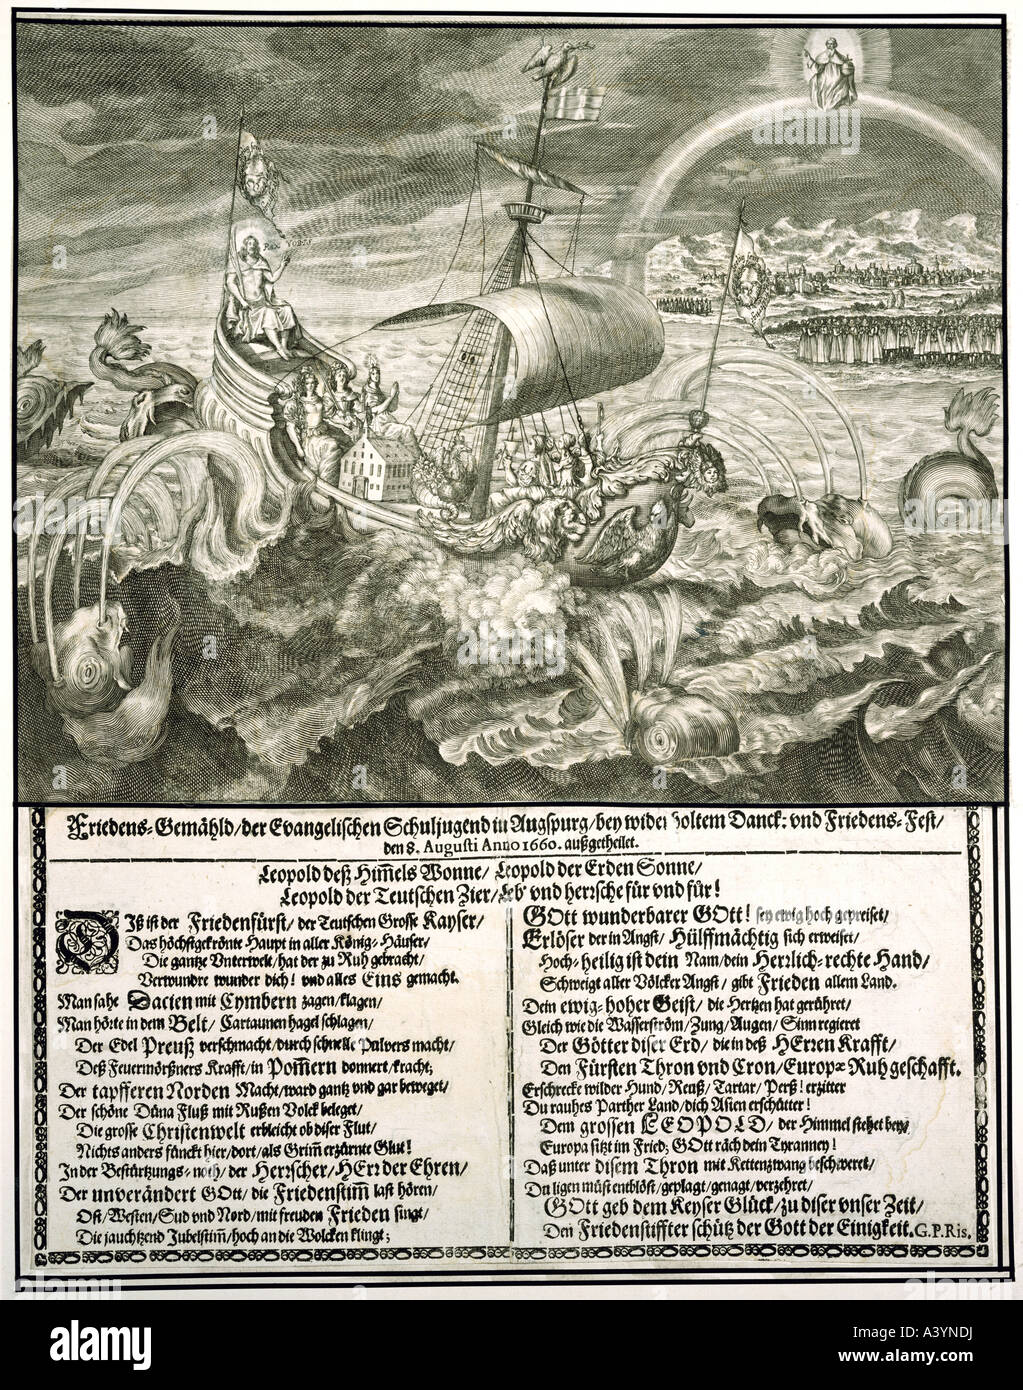 religion, christianity, protestants, peace celebration of Augsburg youth, memorial sheet, 8.8.1660, broadsheet, engraving, 1660, private collection, historic, historical, Europe, Germany, 17th century, events, politics, Thirty Years War 1618 - 1648, 30, peace of Westphalia, equality, ship, water, waves, allegory, people, Artist's Copyright has not to be cleared Stock Photo